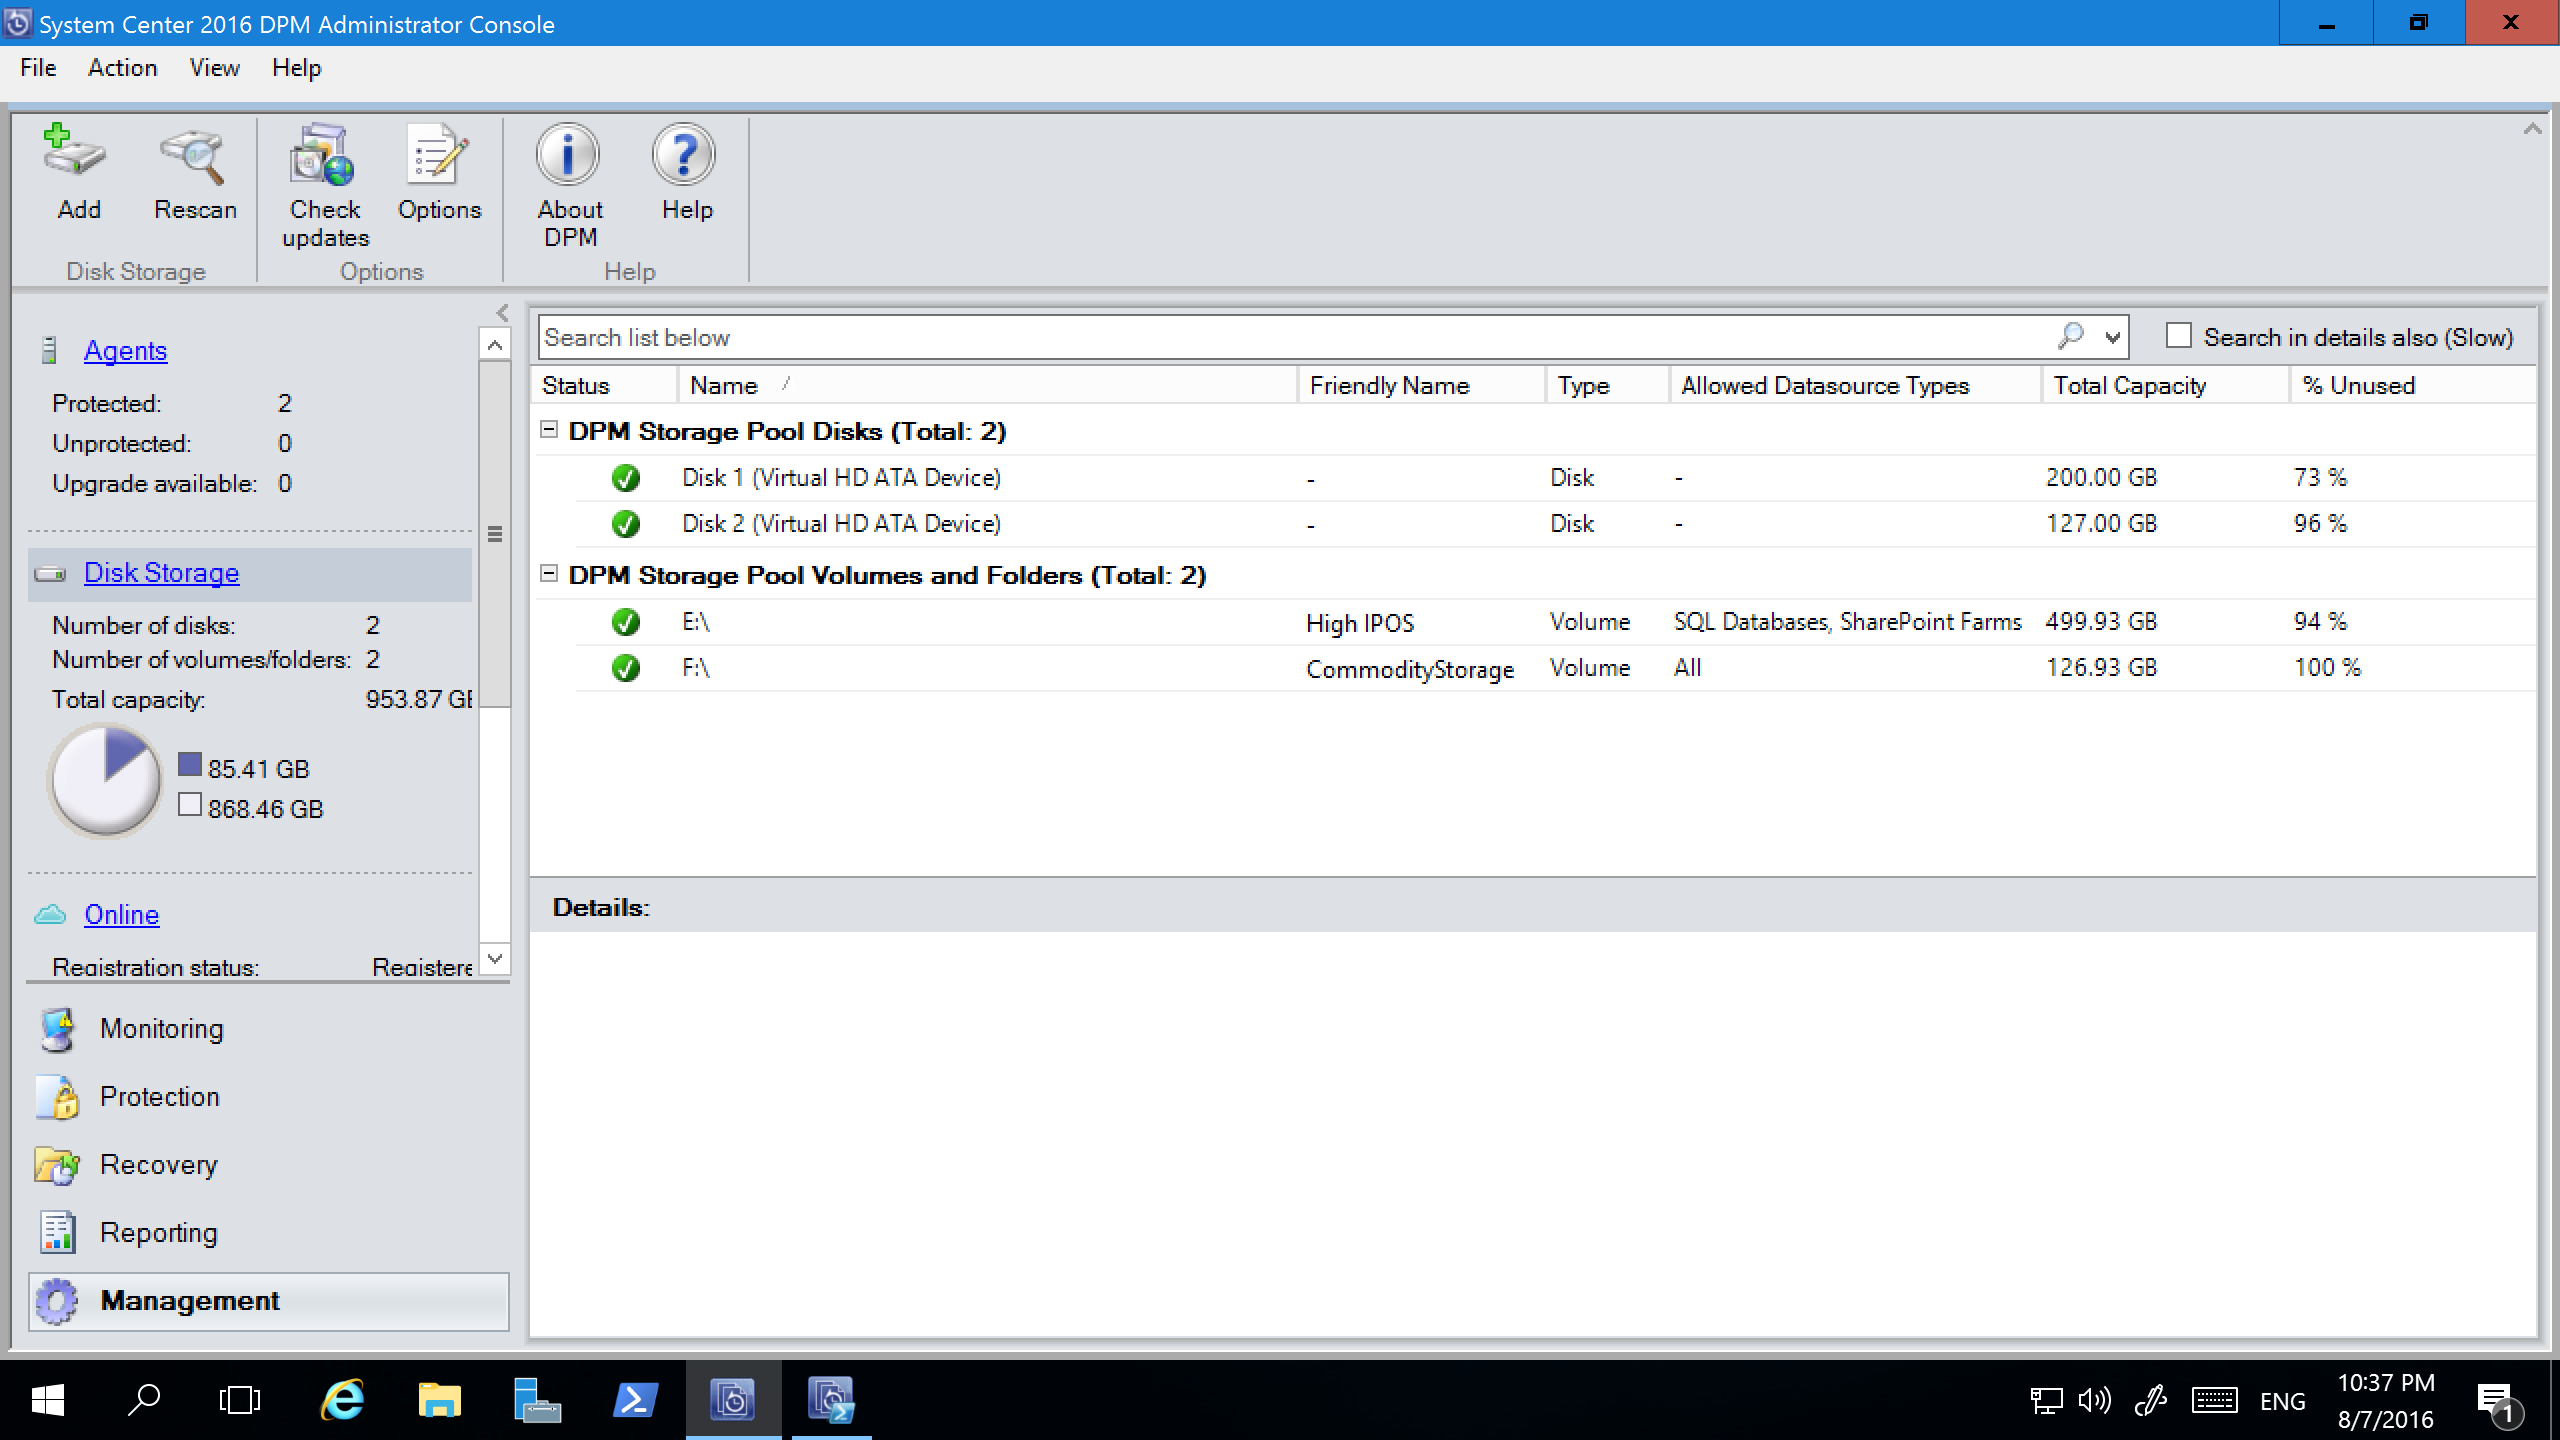 Disks and volumes in the Administrator Console